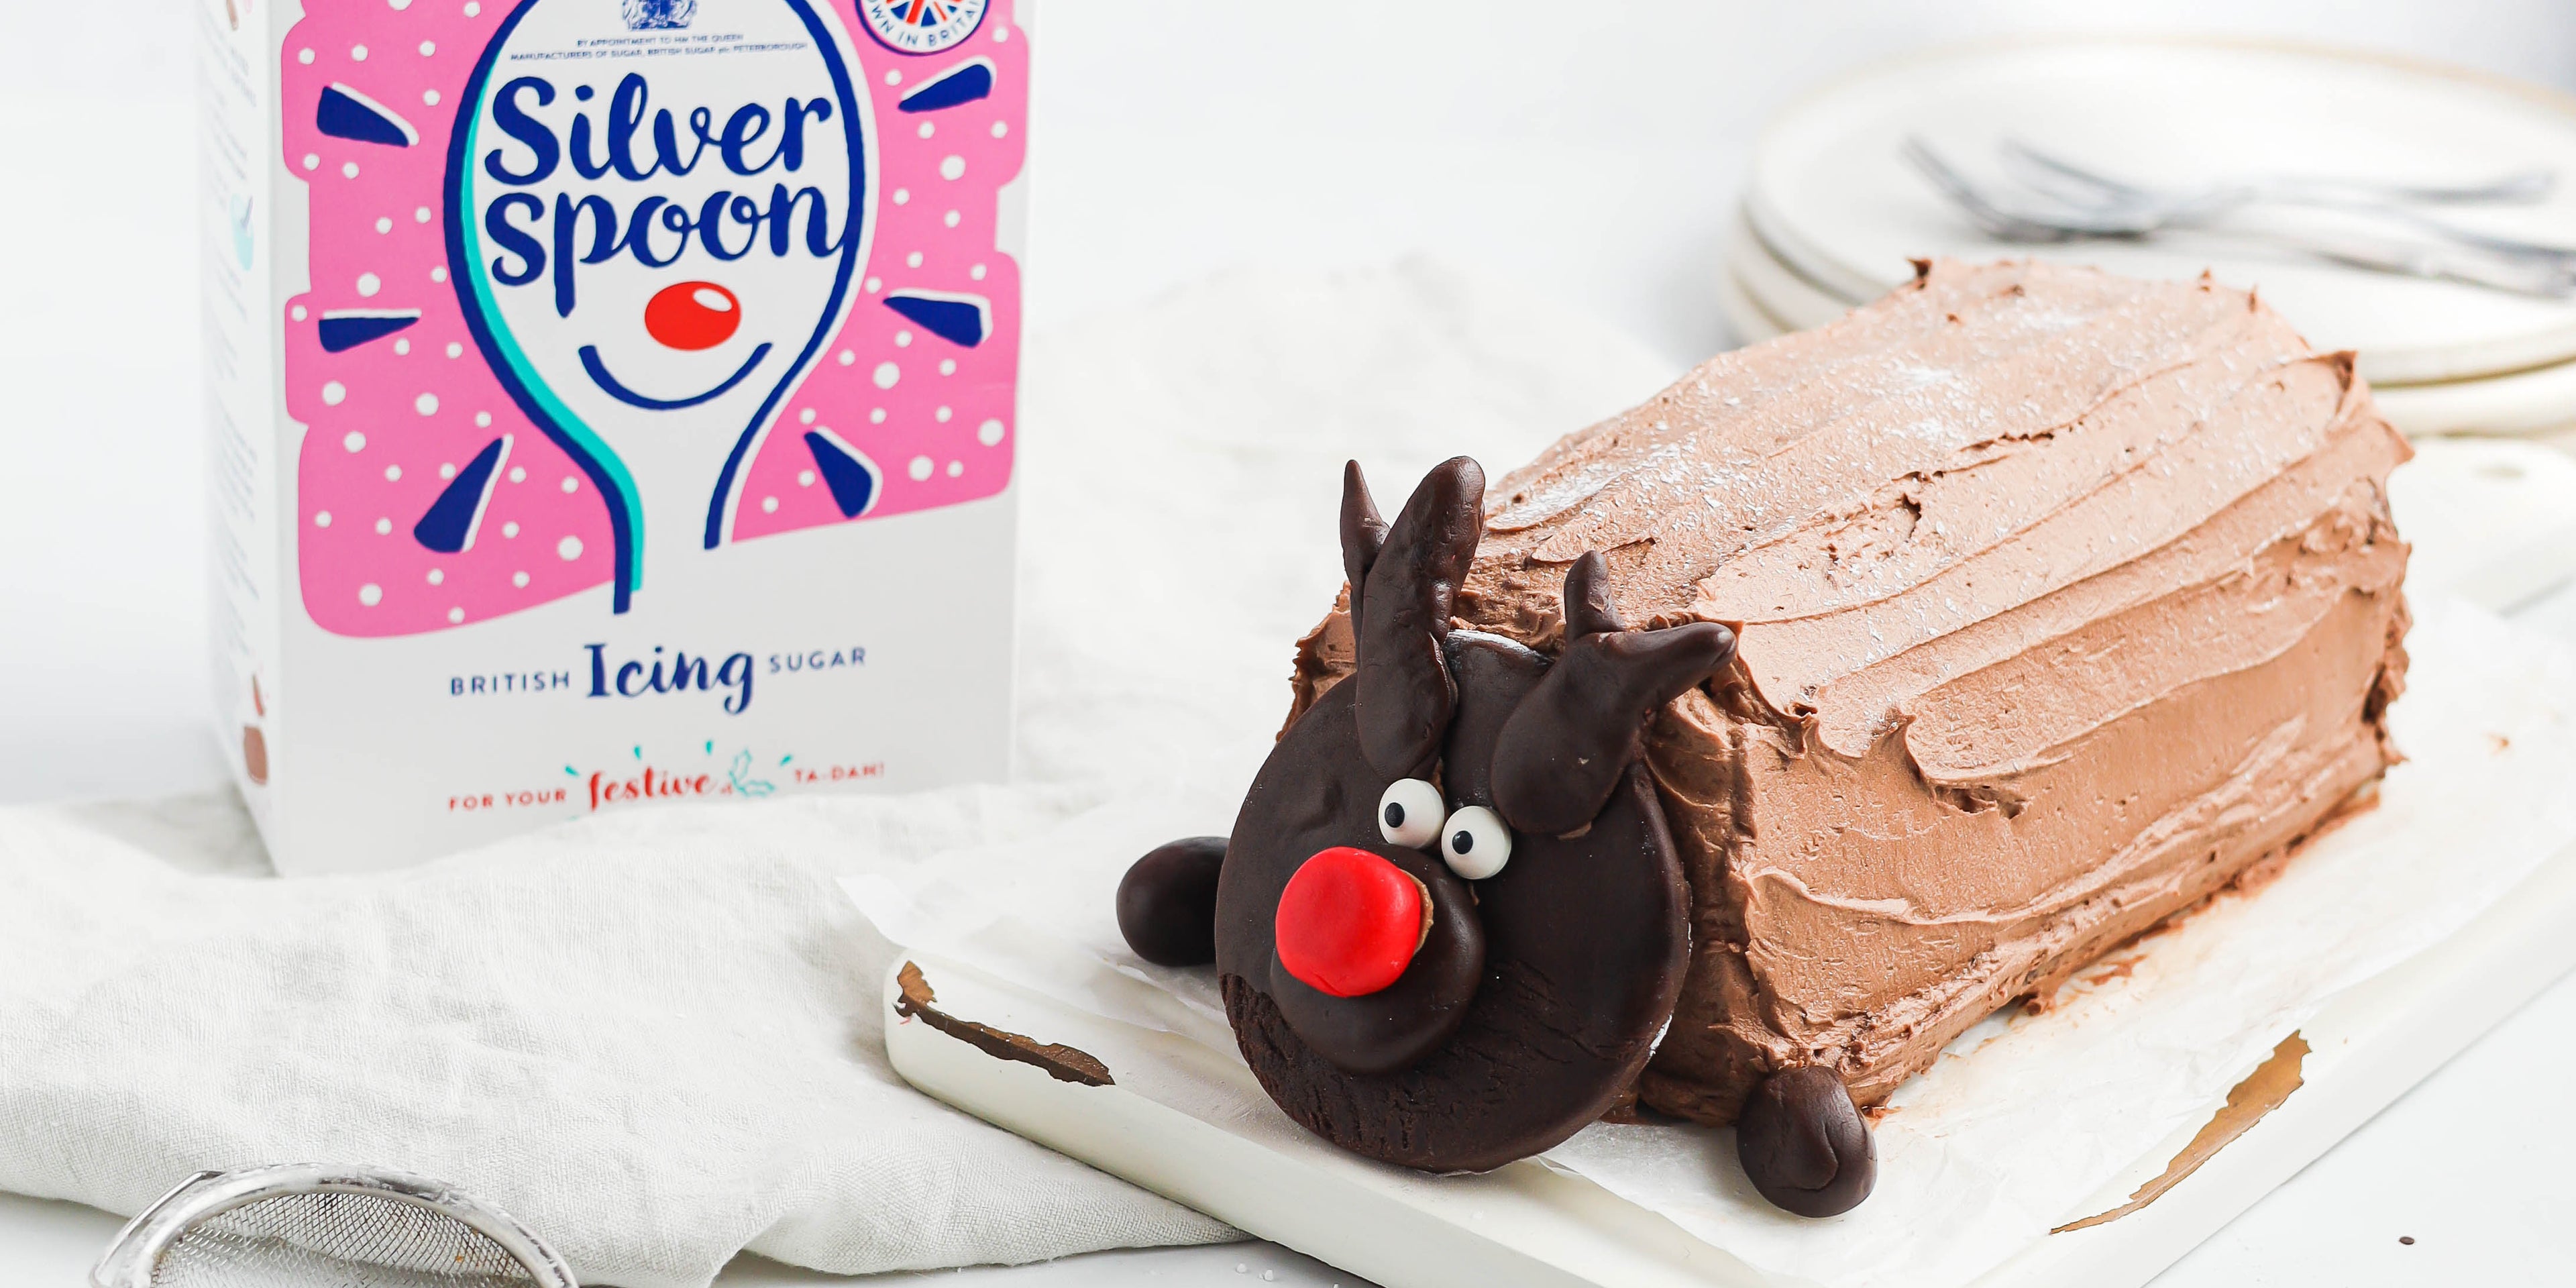 Chocolate Yule Log with a chocolate reindeer face made out of dark chocolate next to a a box of Silver Spoon Icing Sugar